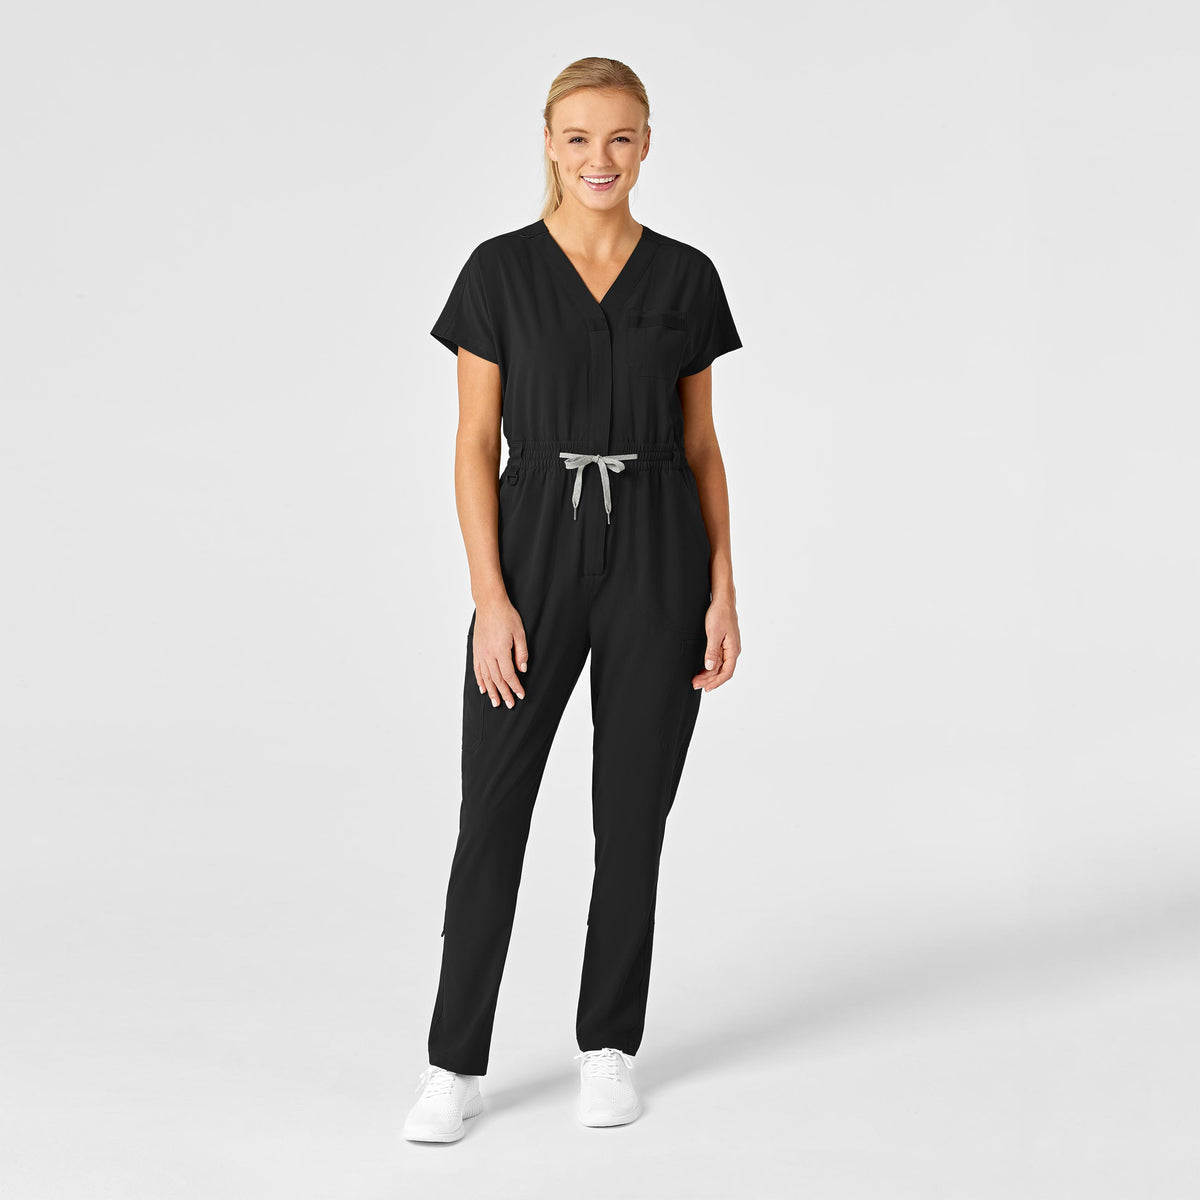 Black scrubs for women • Compare & see prices now »